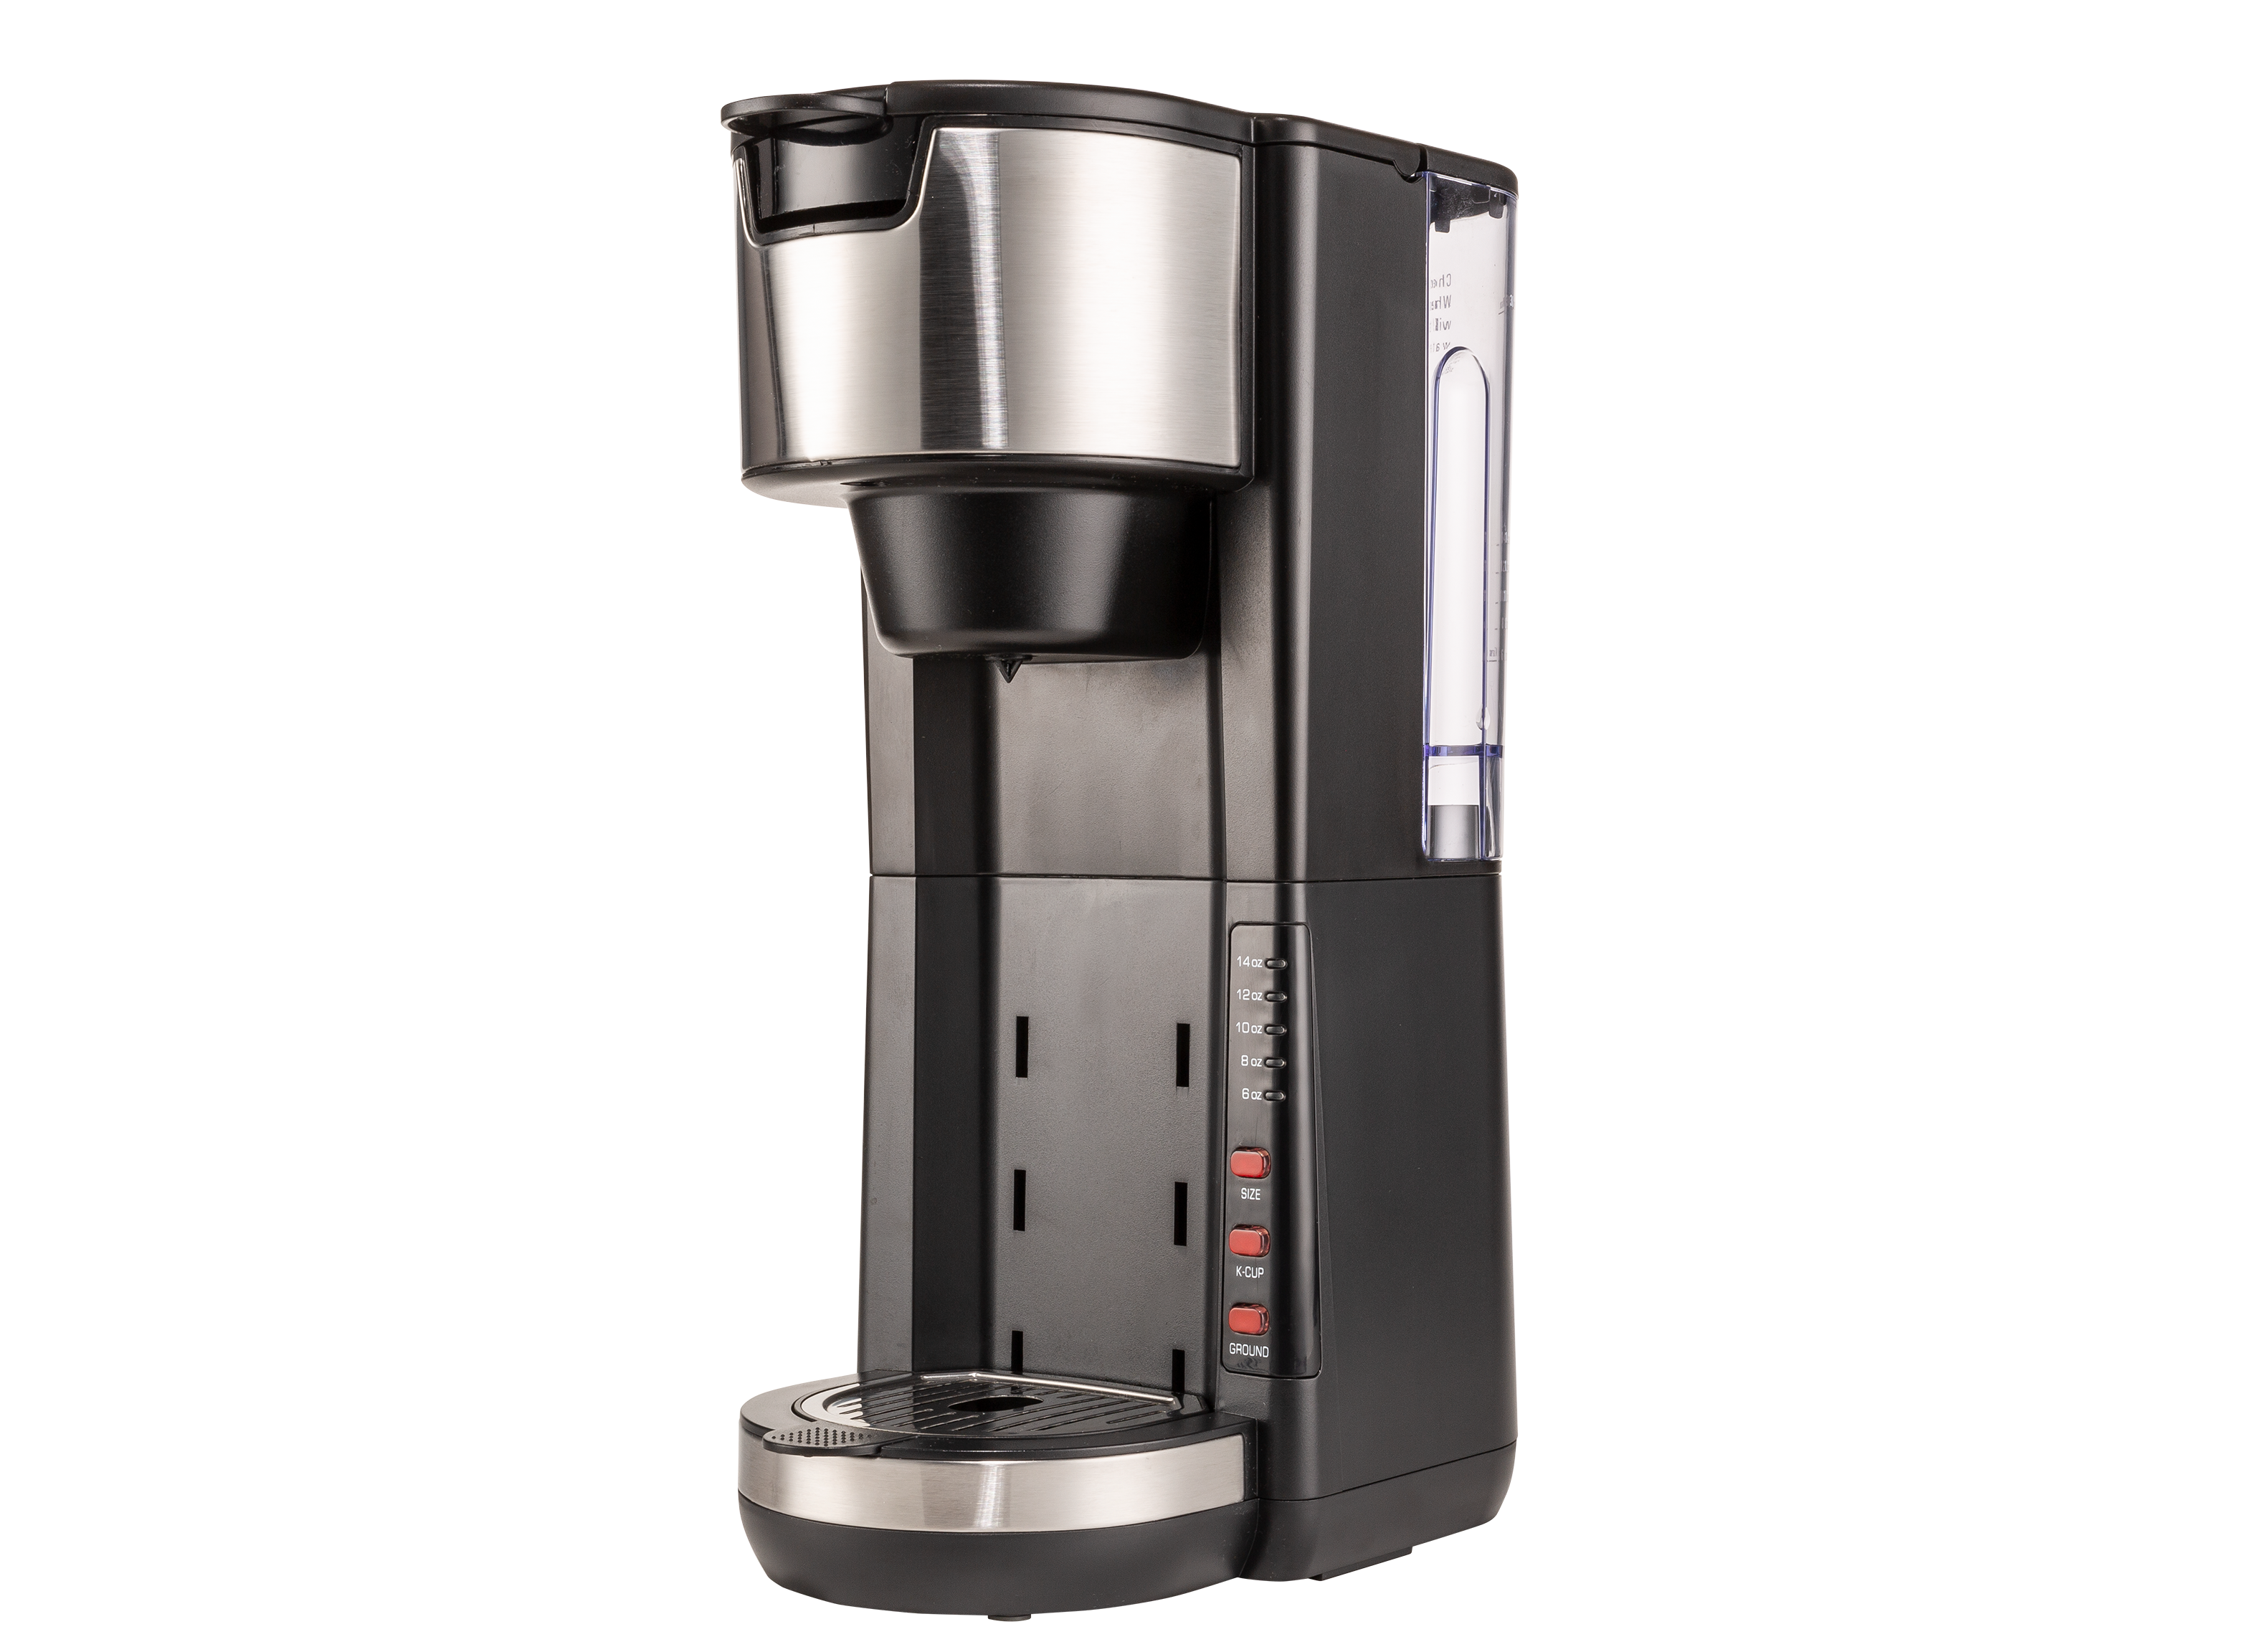 https://crdms.images.consumerreports.org/prod/products/cr/models/412816-dual-coffee-makers-mixpresso-2-in-1-single-cup-coffee-maker-10037416.png